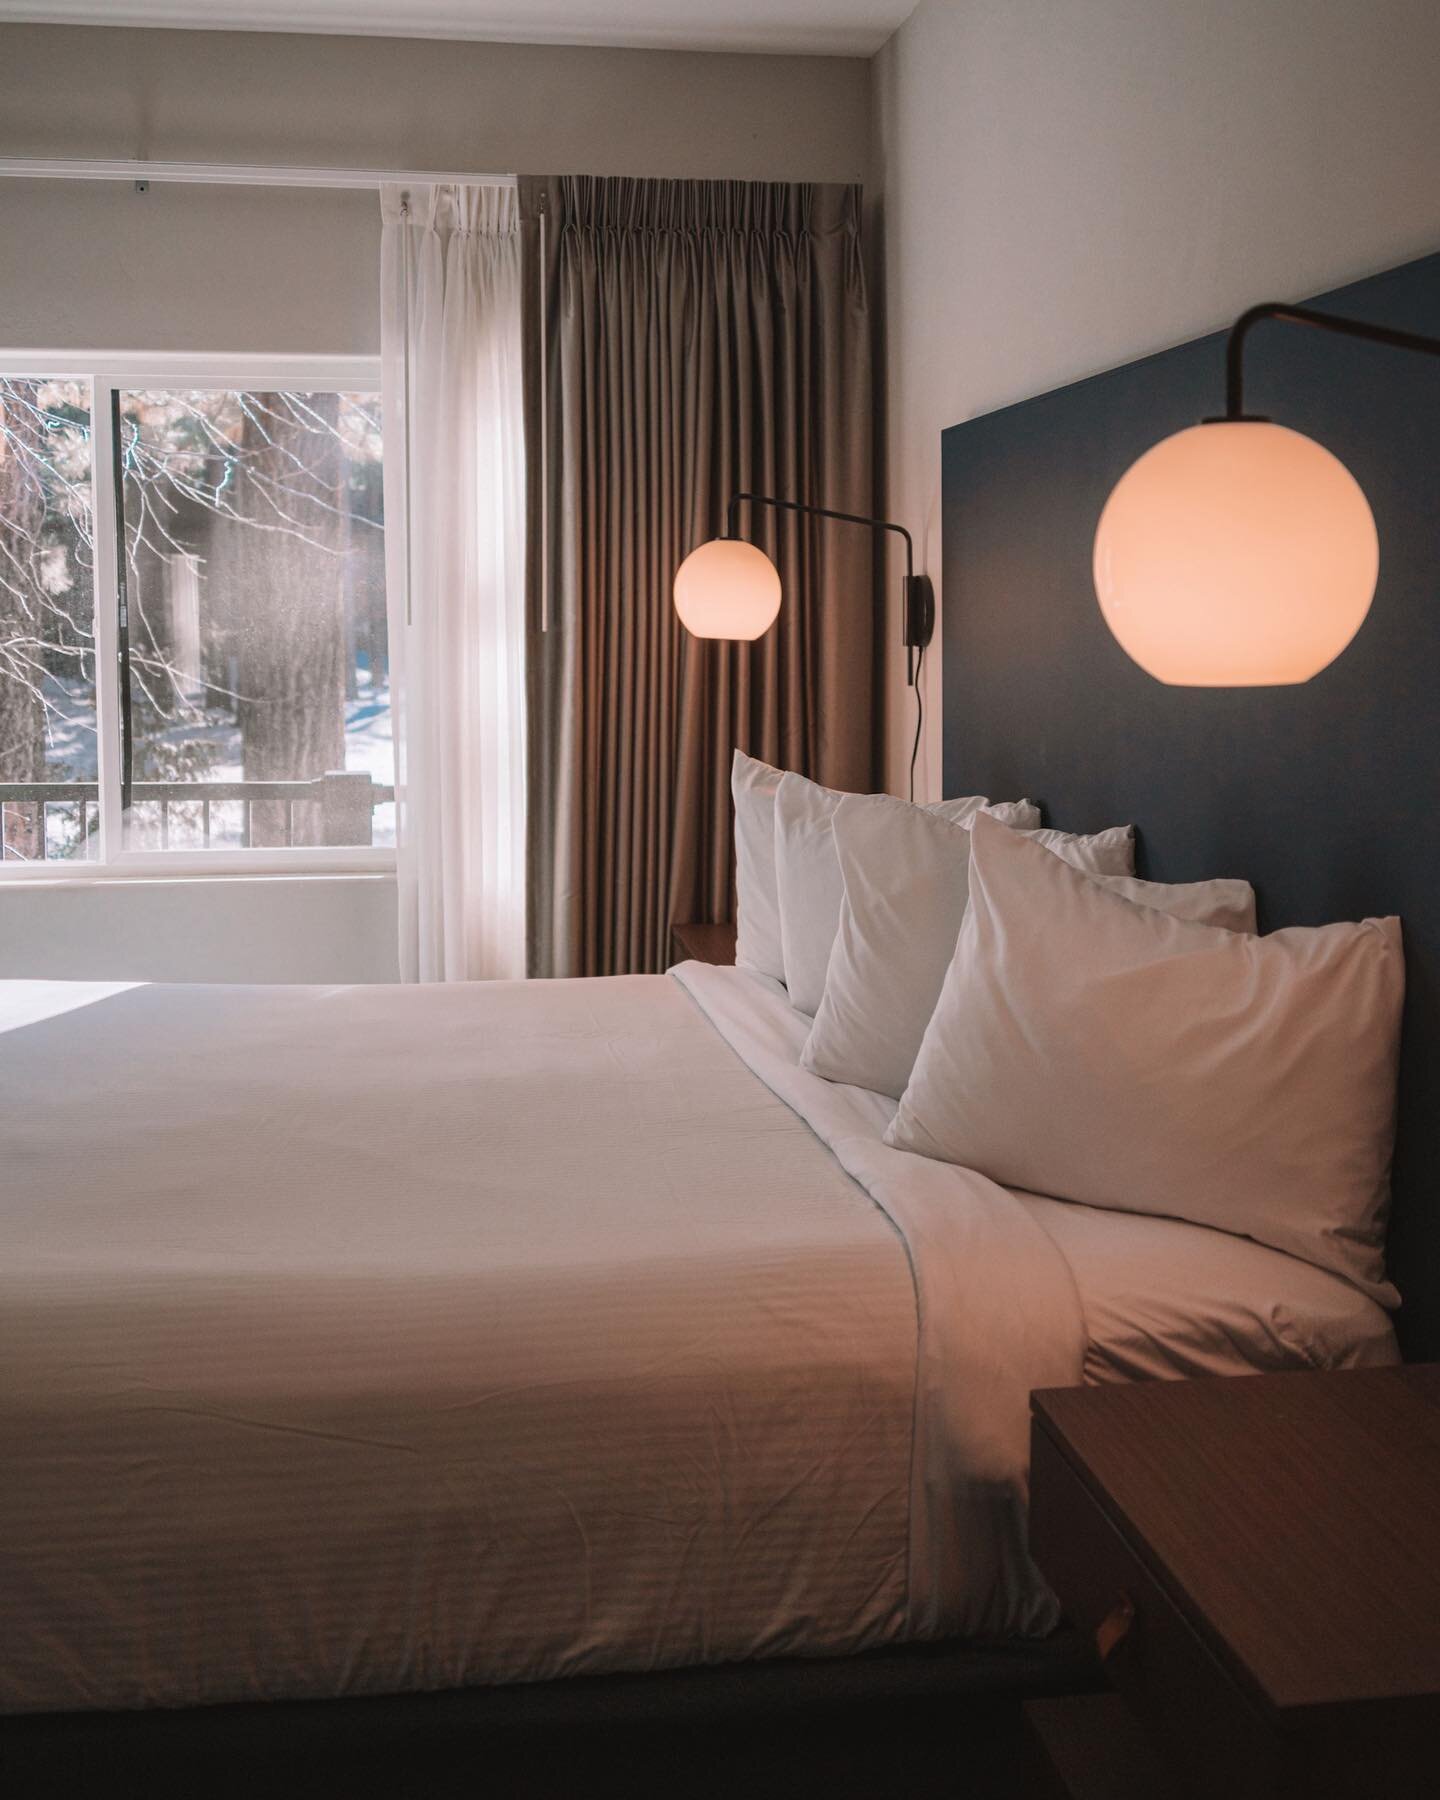 Our Rubicon Suites are fast becoming some of our most popular bookings, with room in most for a comfortable, extended stay, plus balcony views out to our garden! 

Stay awhile this spring 🌱
.
.
📷 @nikolelynn.s